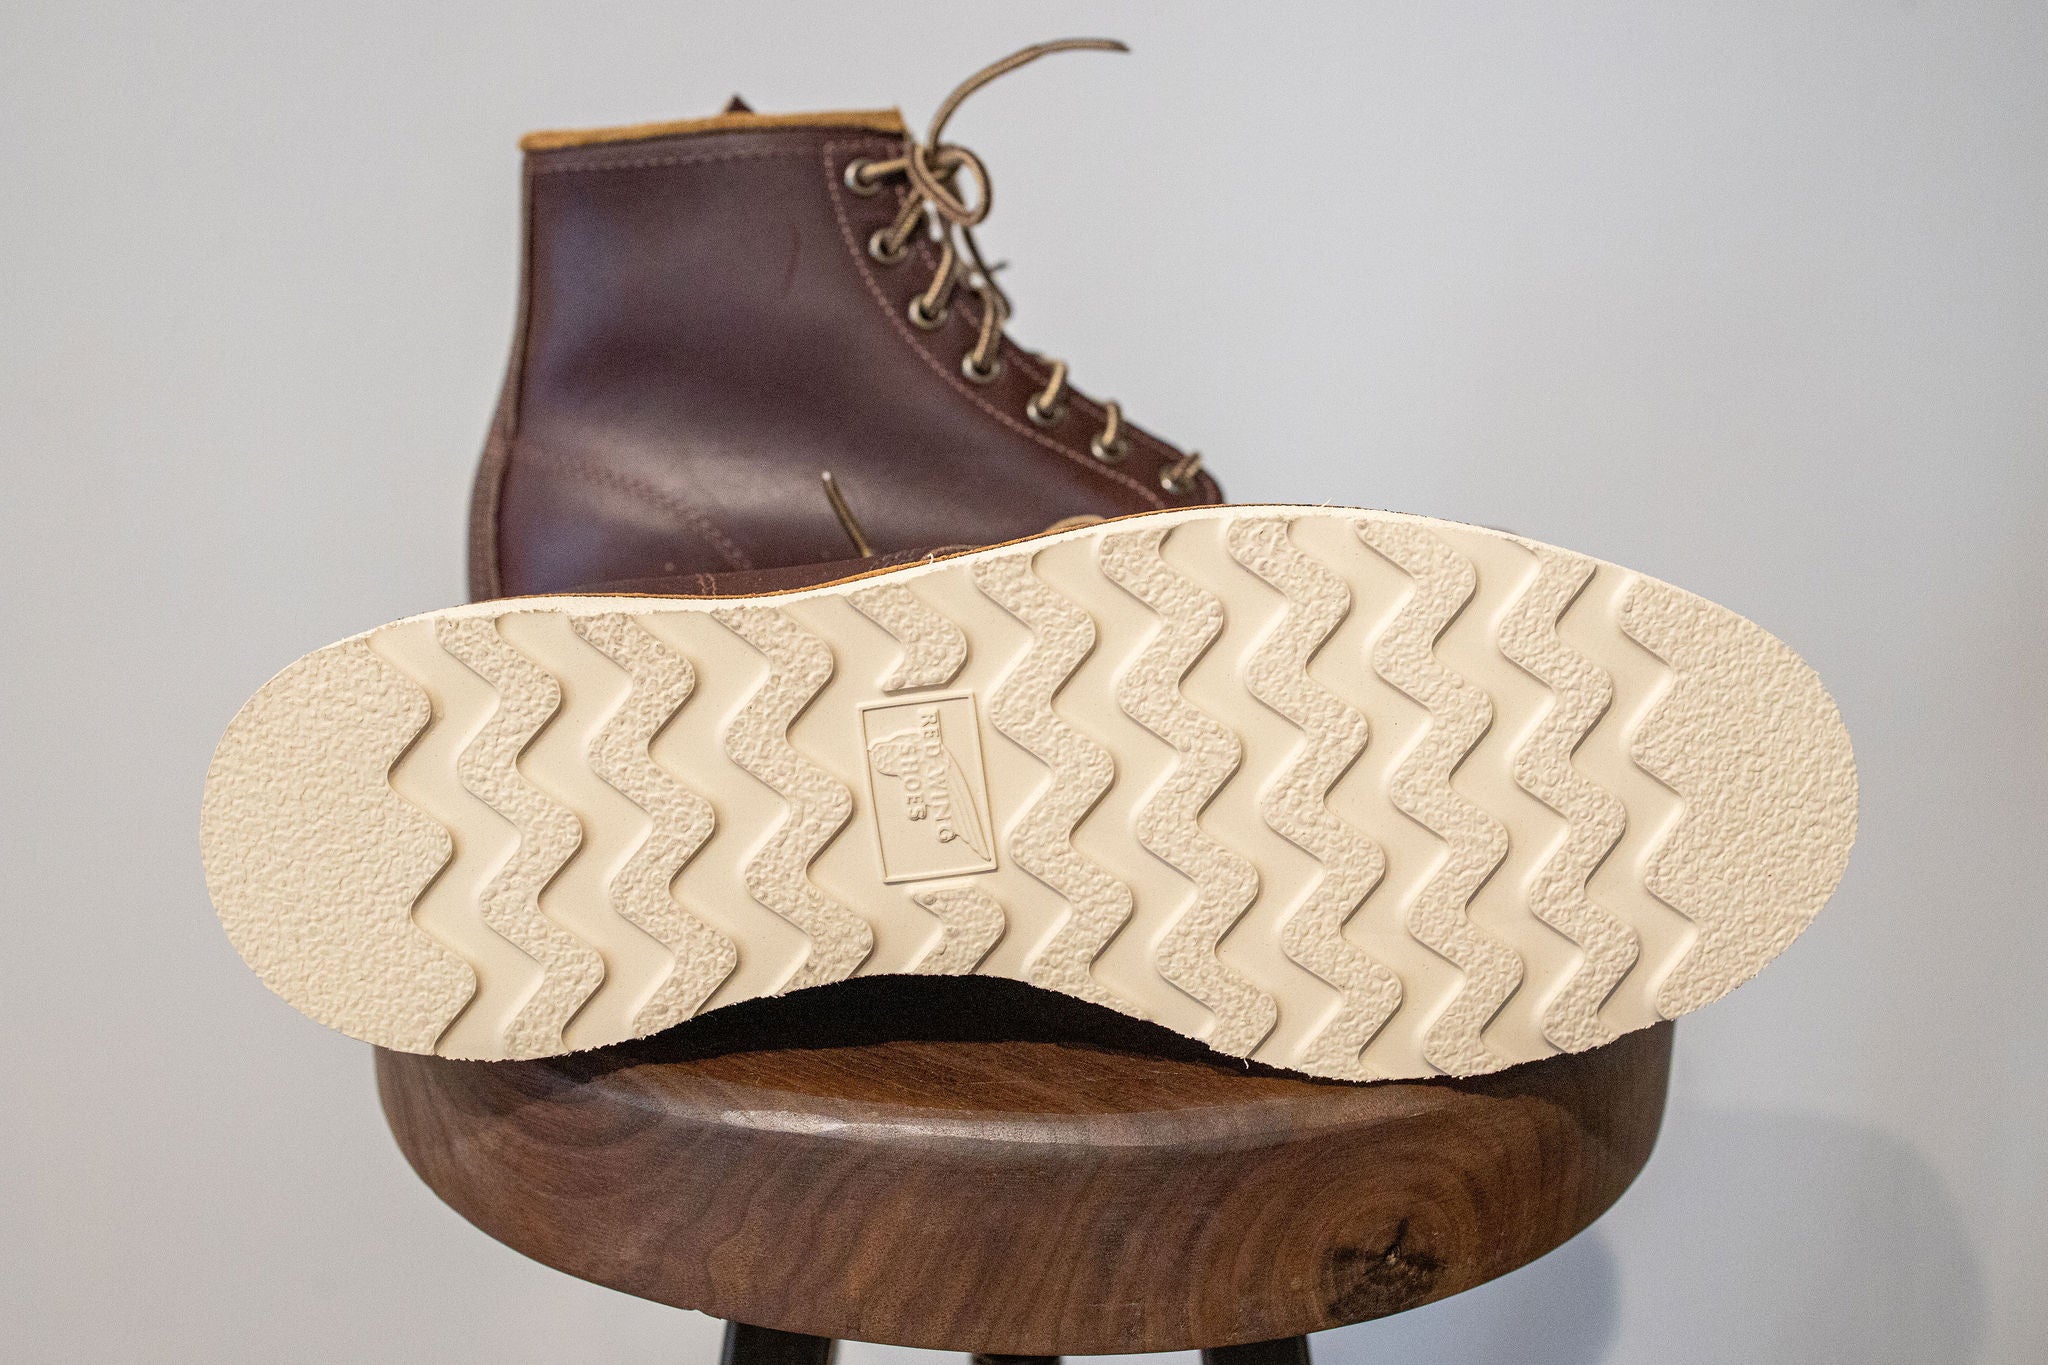 red wing heritage moc boot